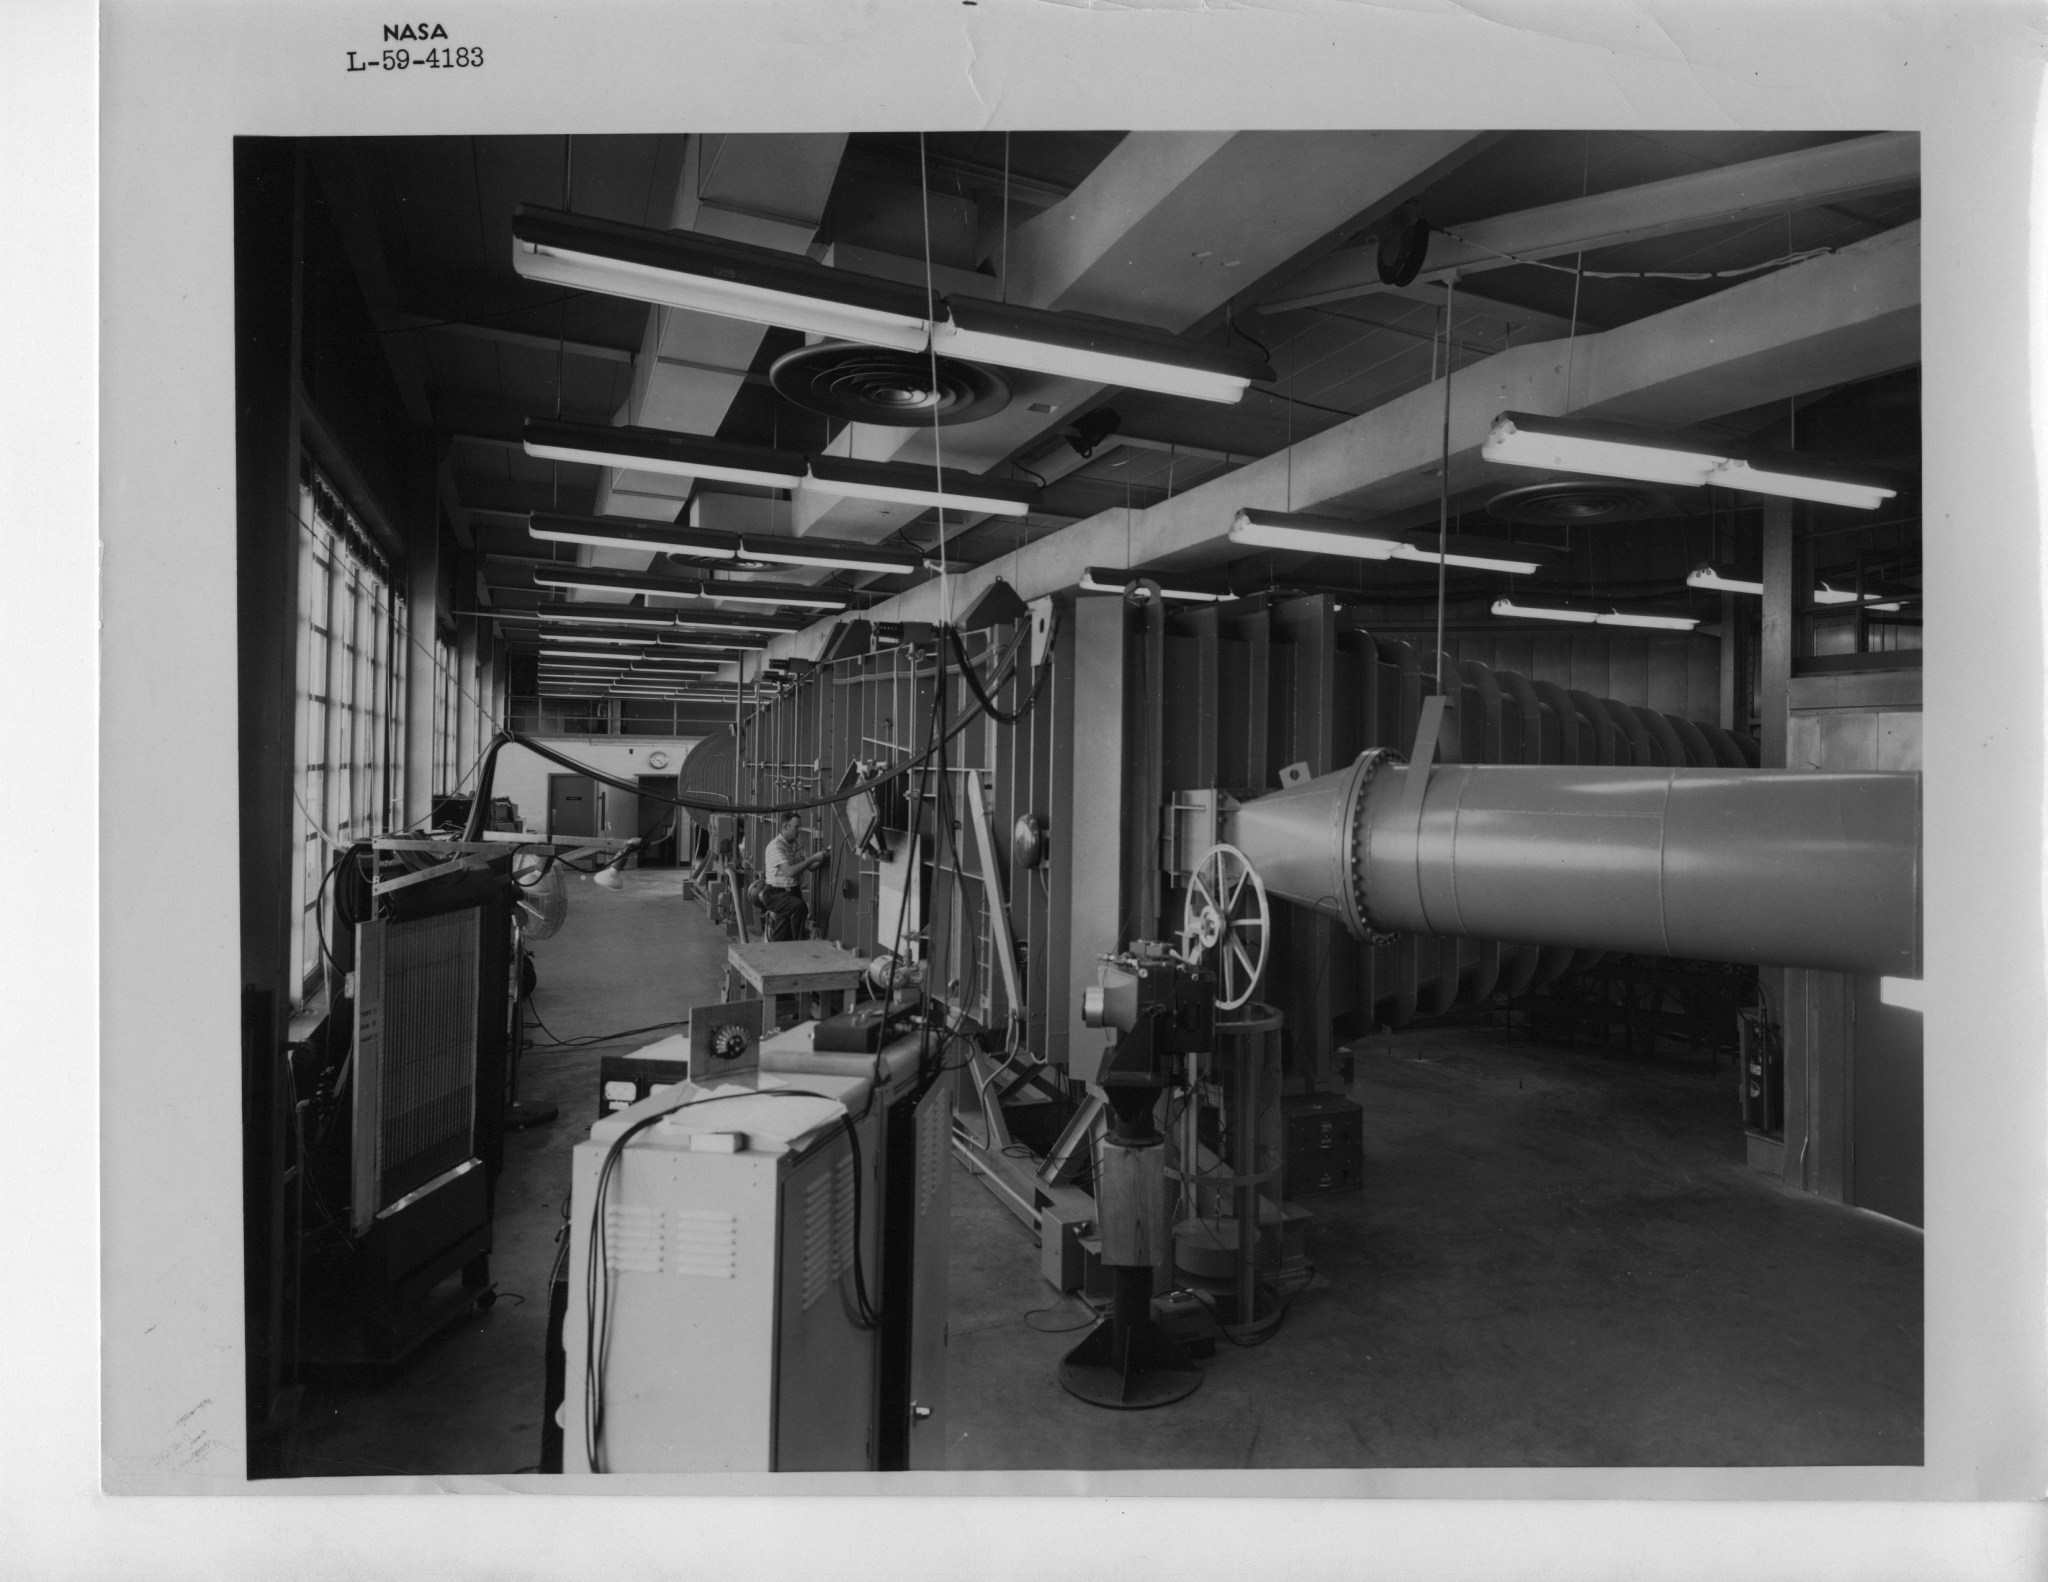 The 2-Foot Hypersonic Tunnel, seen here in 1959, was constructed on the 2nd floor of Building 640.